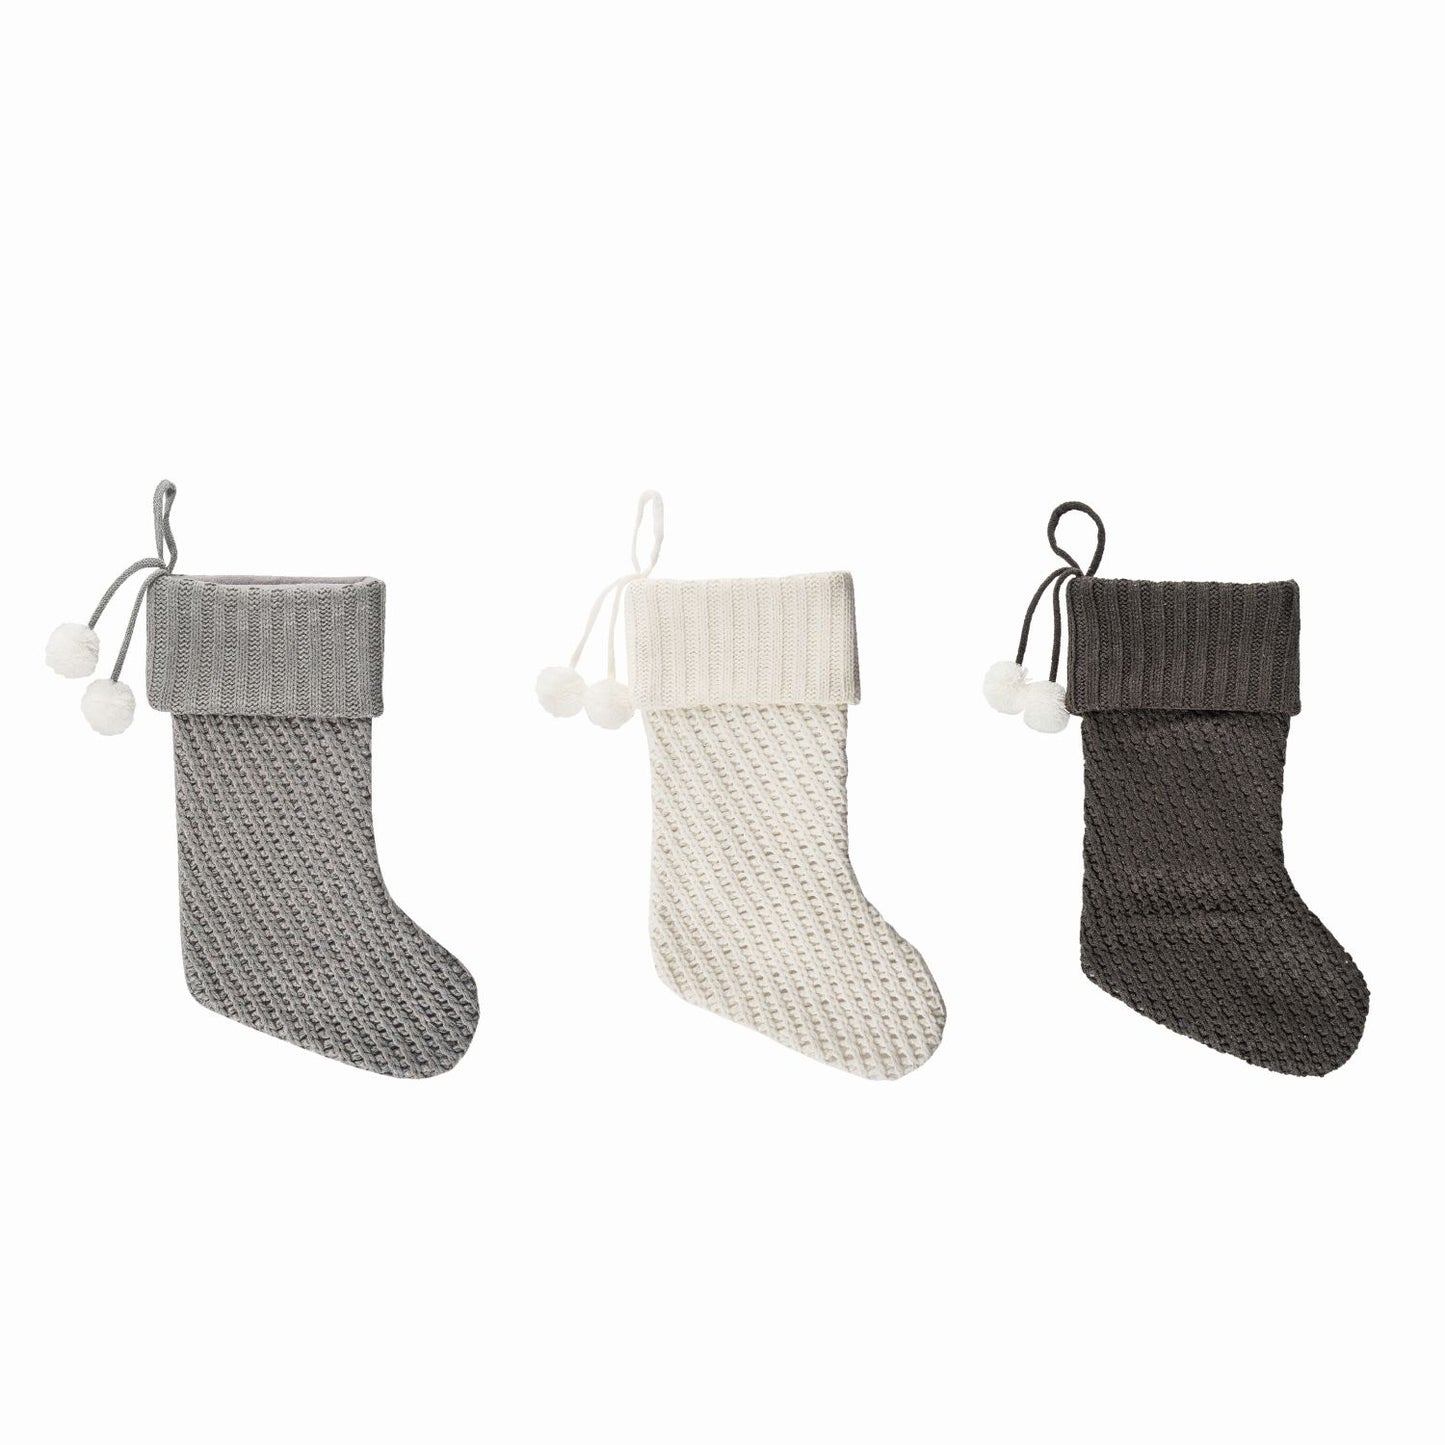 Transpac Knitted Winter Stocking, Set Of 3, Assortment